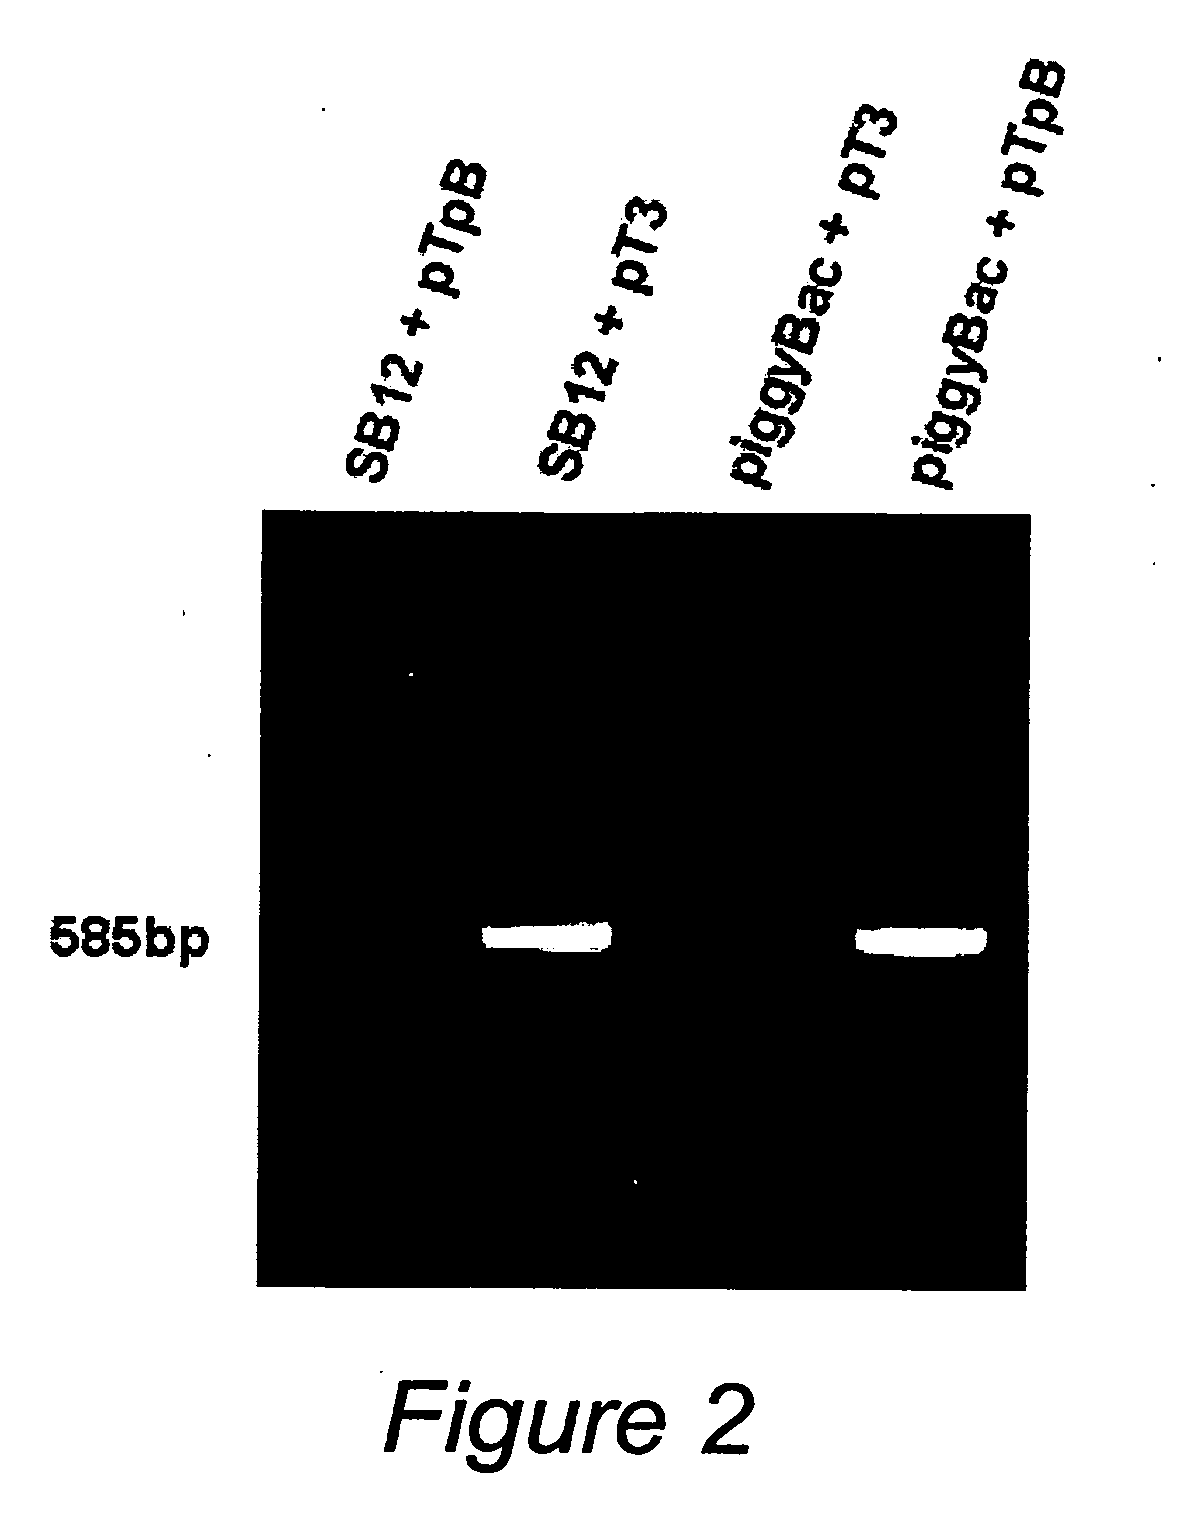 Piggybac transposon-based vectors and methods of nucleic acid integration